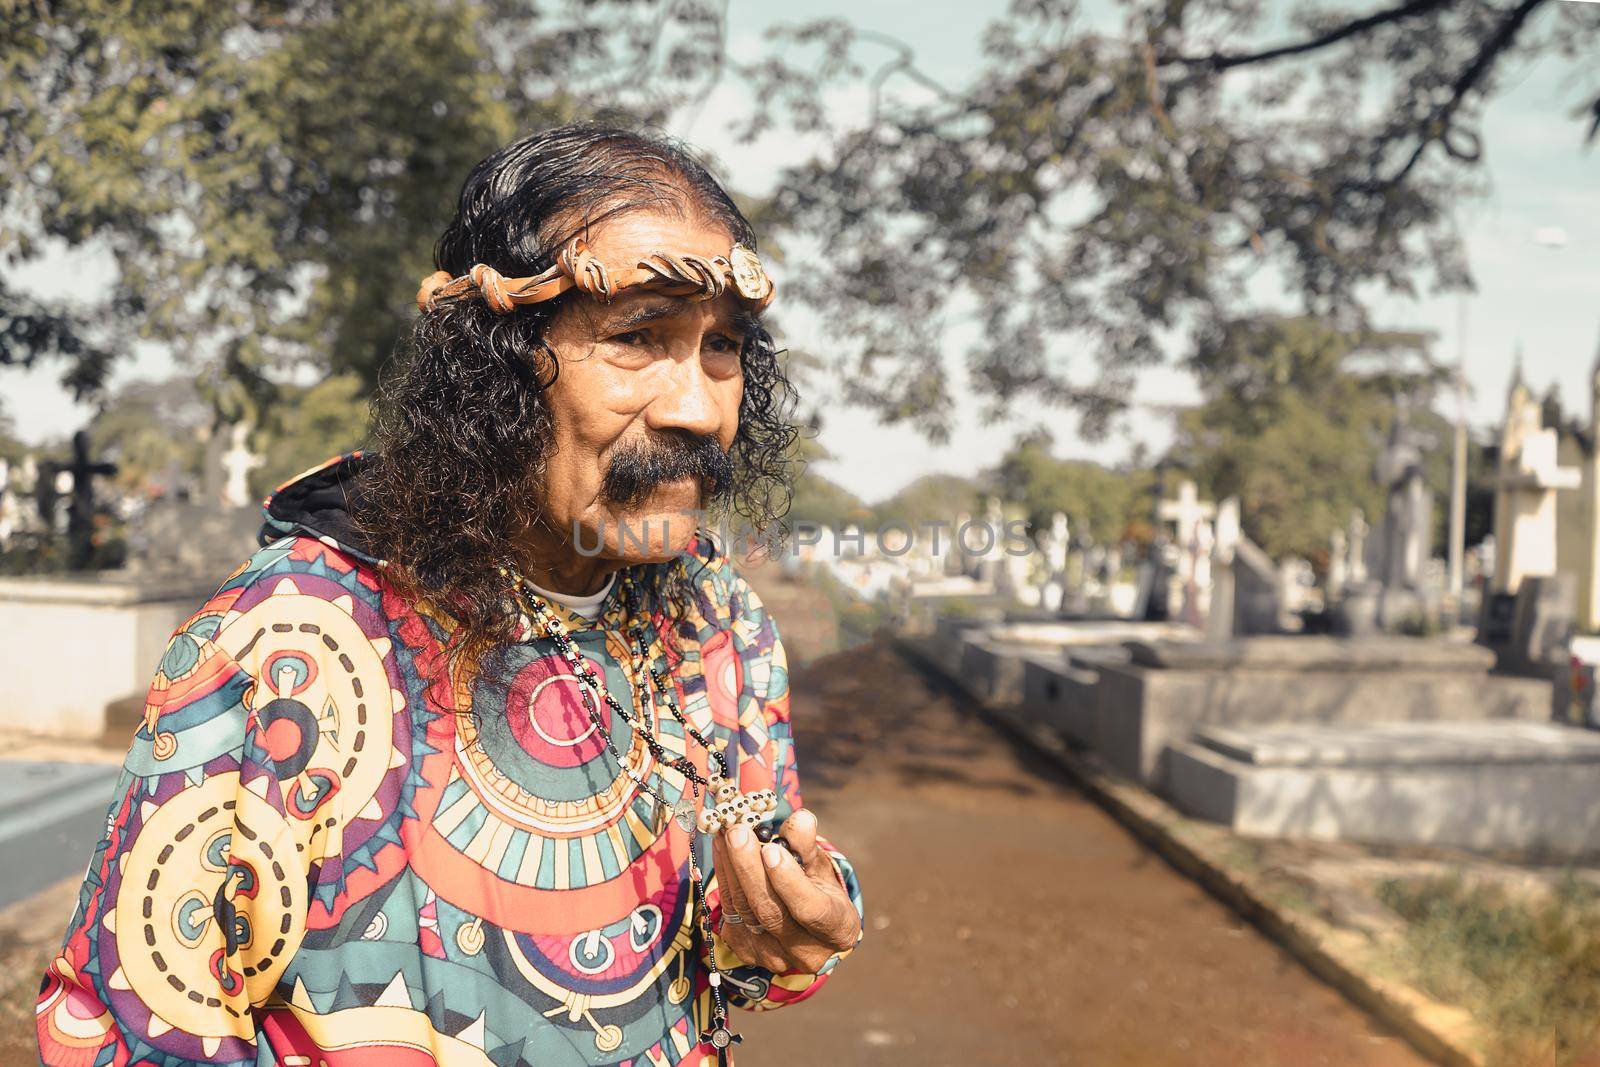 Devotee of Santa Muerte playing her skull and crossbones crucifix in a cemetery in Nicaragua by cfalvarez